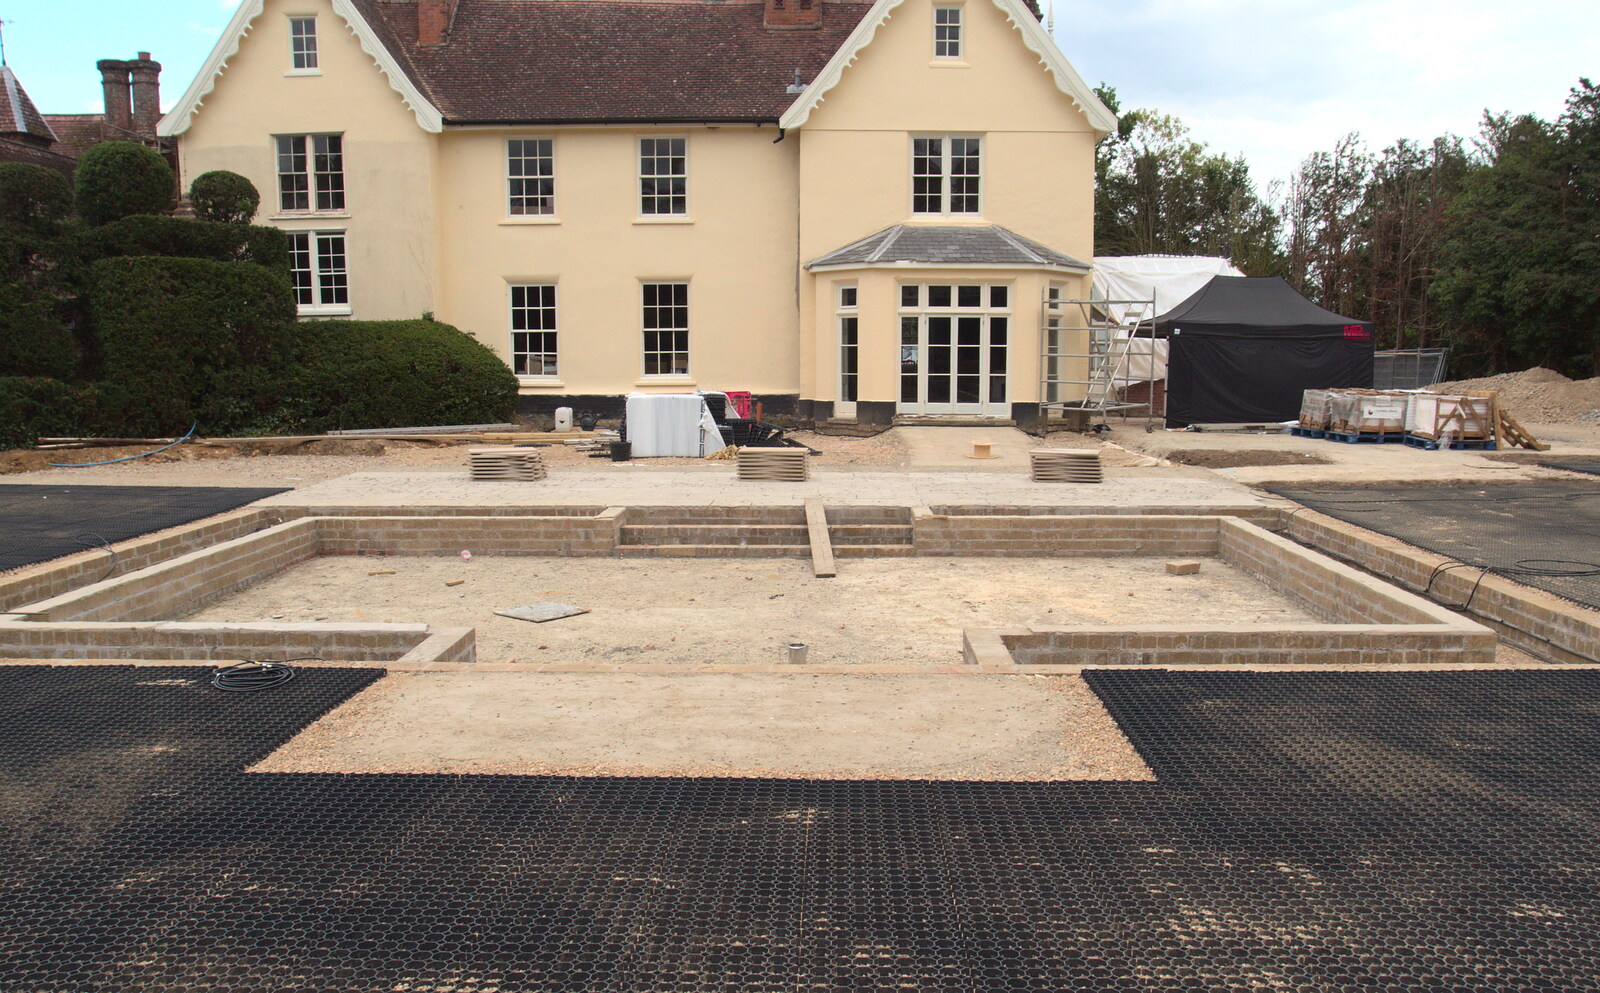 Work on the sunken patio continues from SwiftKey Innovation Days, The Haymarket, London - 27th June 2014